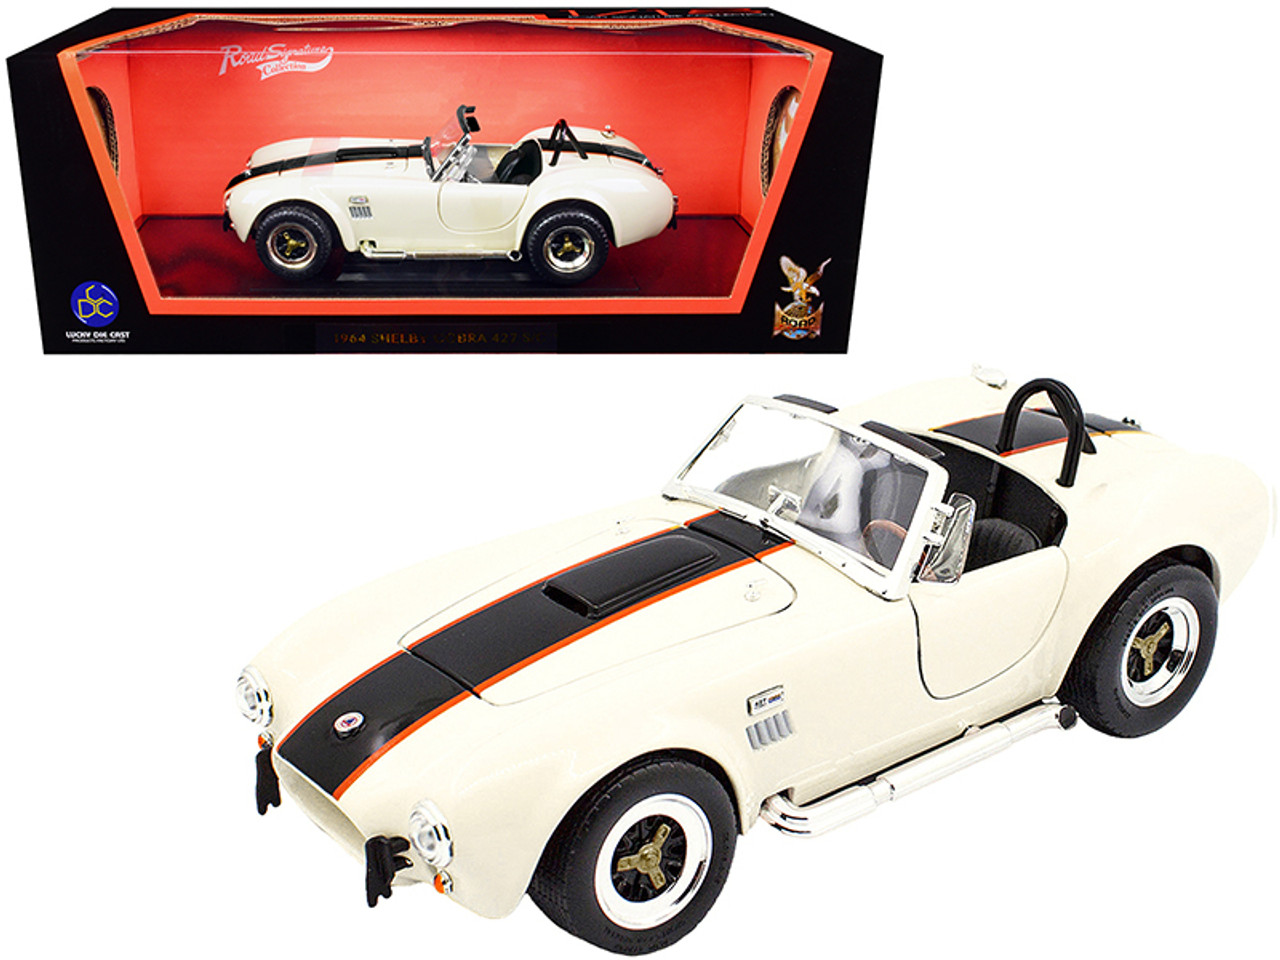 1964 Ford Mustang Shelby Cobra 427 S/C Roadster Cream with Black and Orange Stripes 1/18 Diecast Model Car by Road Signature